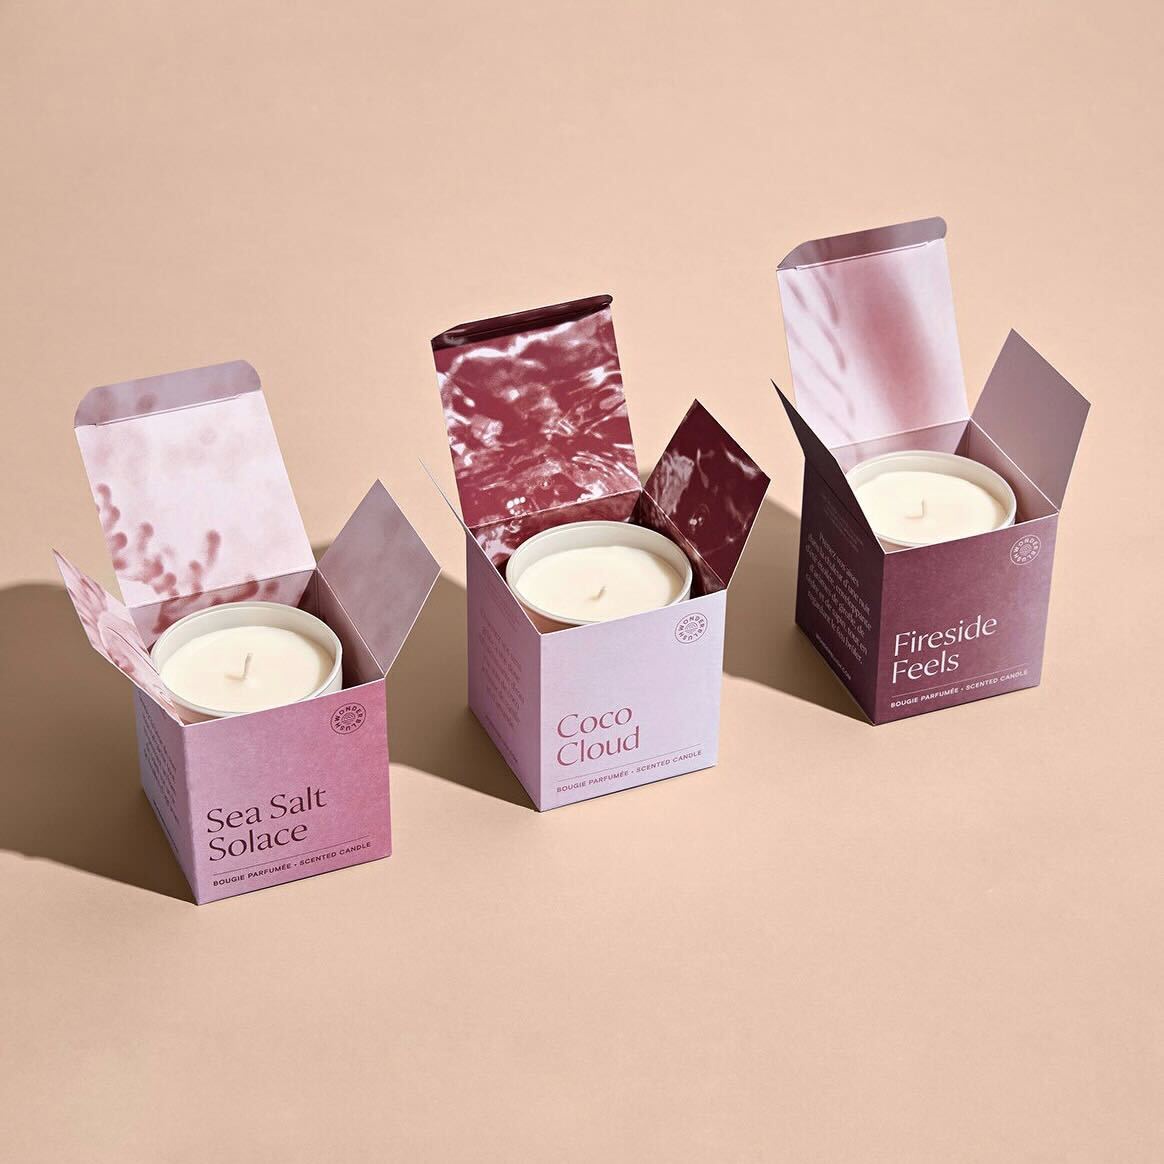 Wholesale Packaging for Candles Design: Enhancing Brand Identity